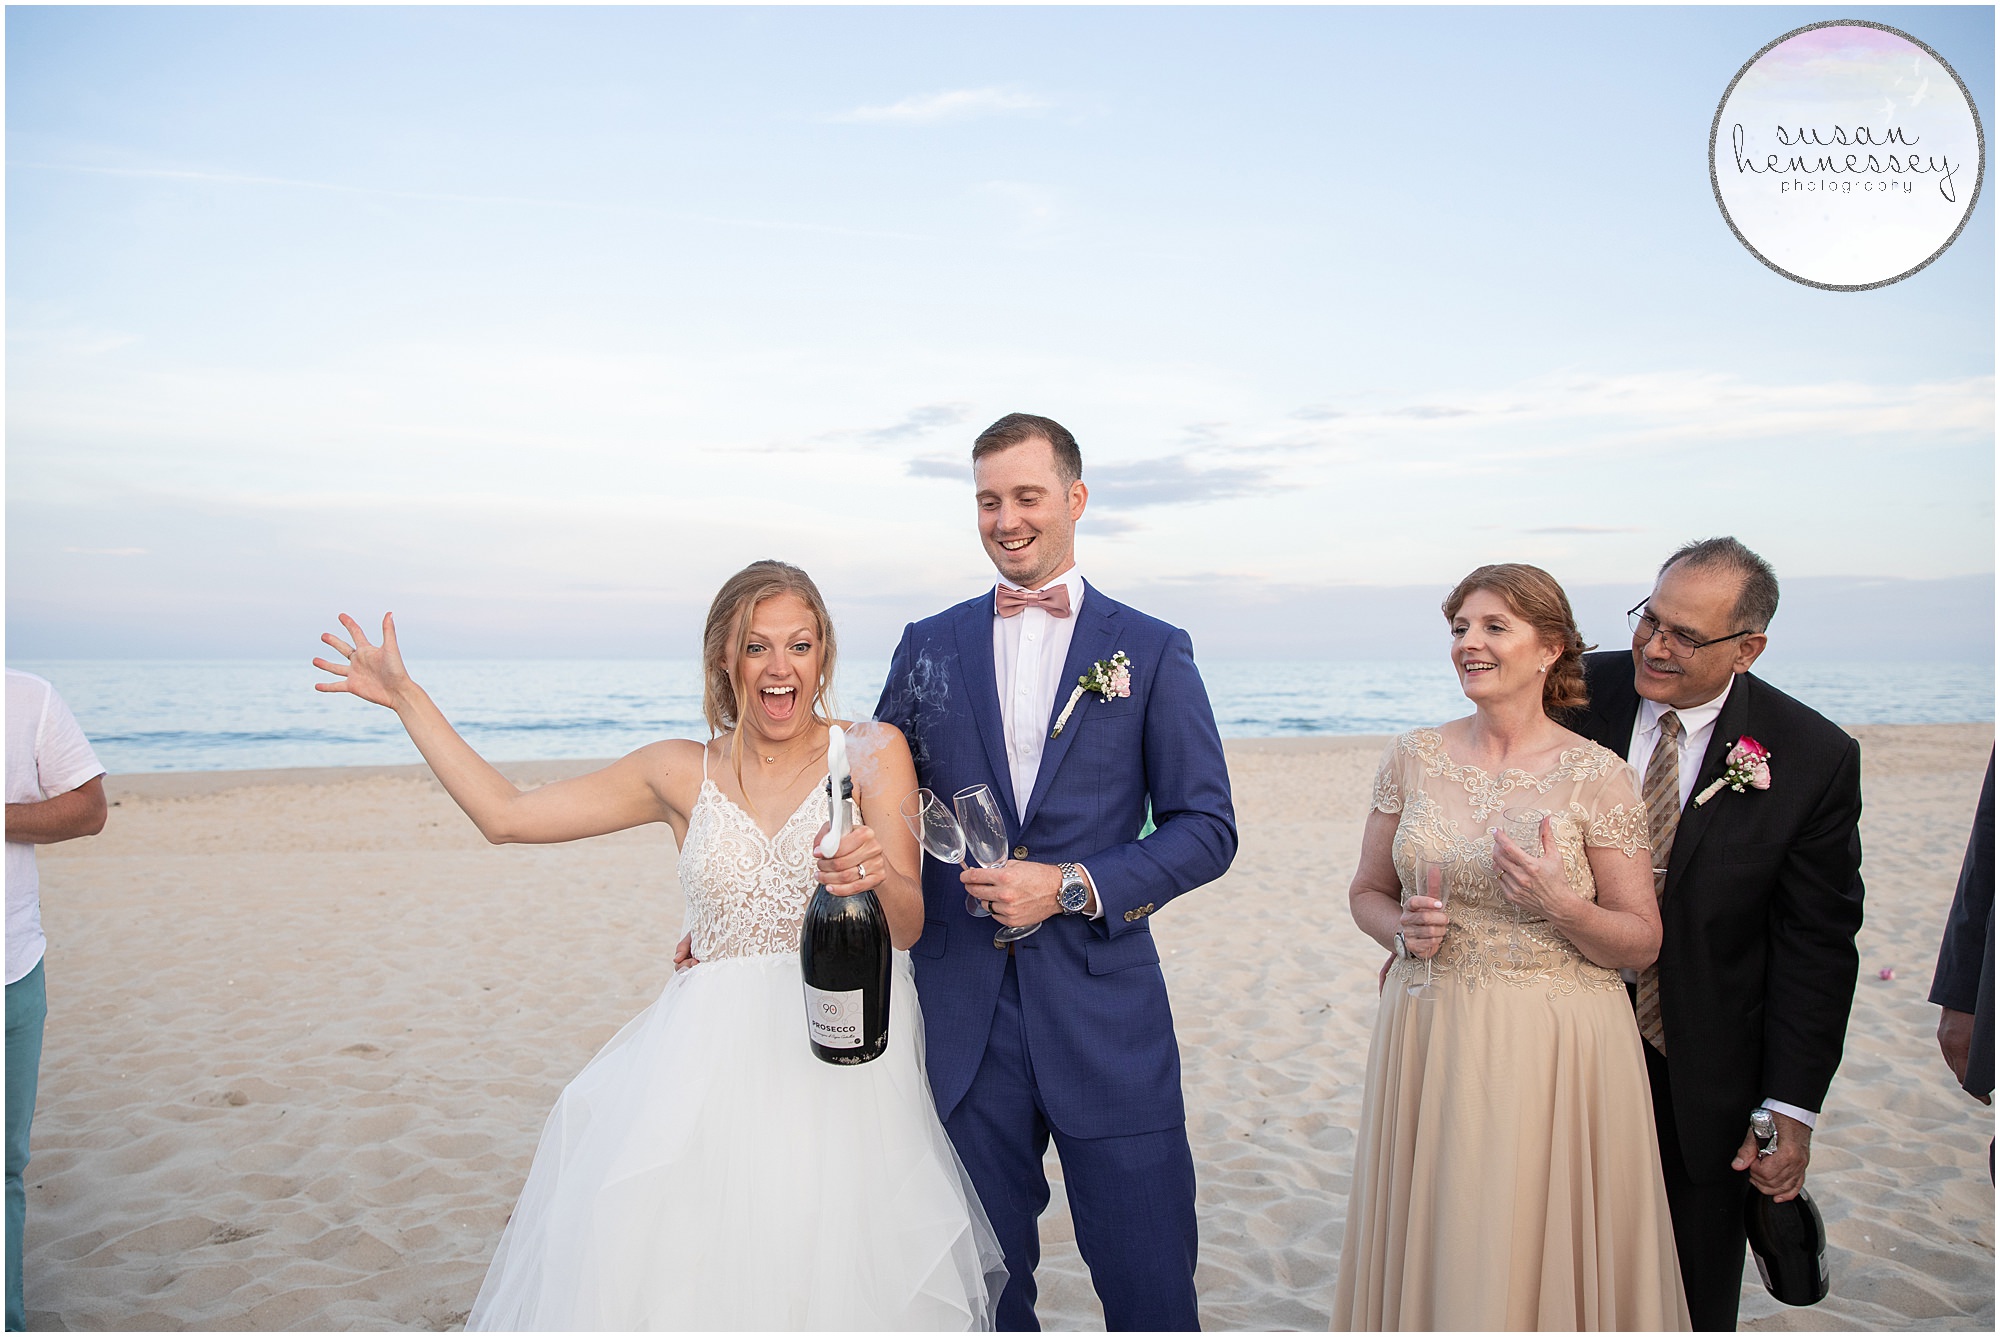 Susan Hennessey Photography Best of 2020 Weddings - LBI Microwedding champagne and speeches on the beach